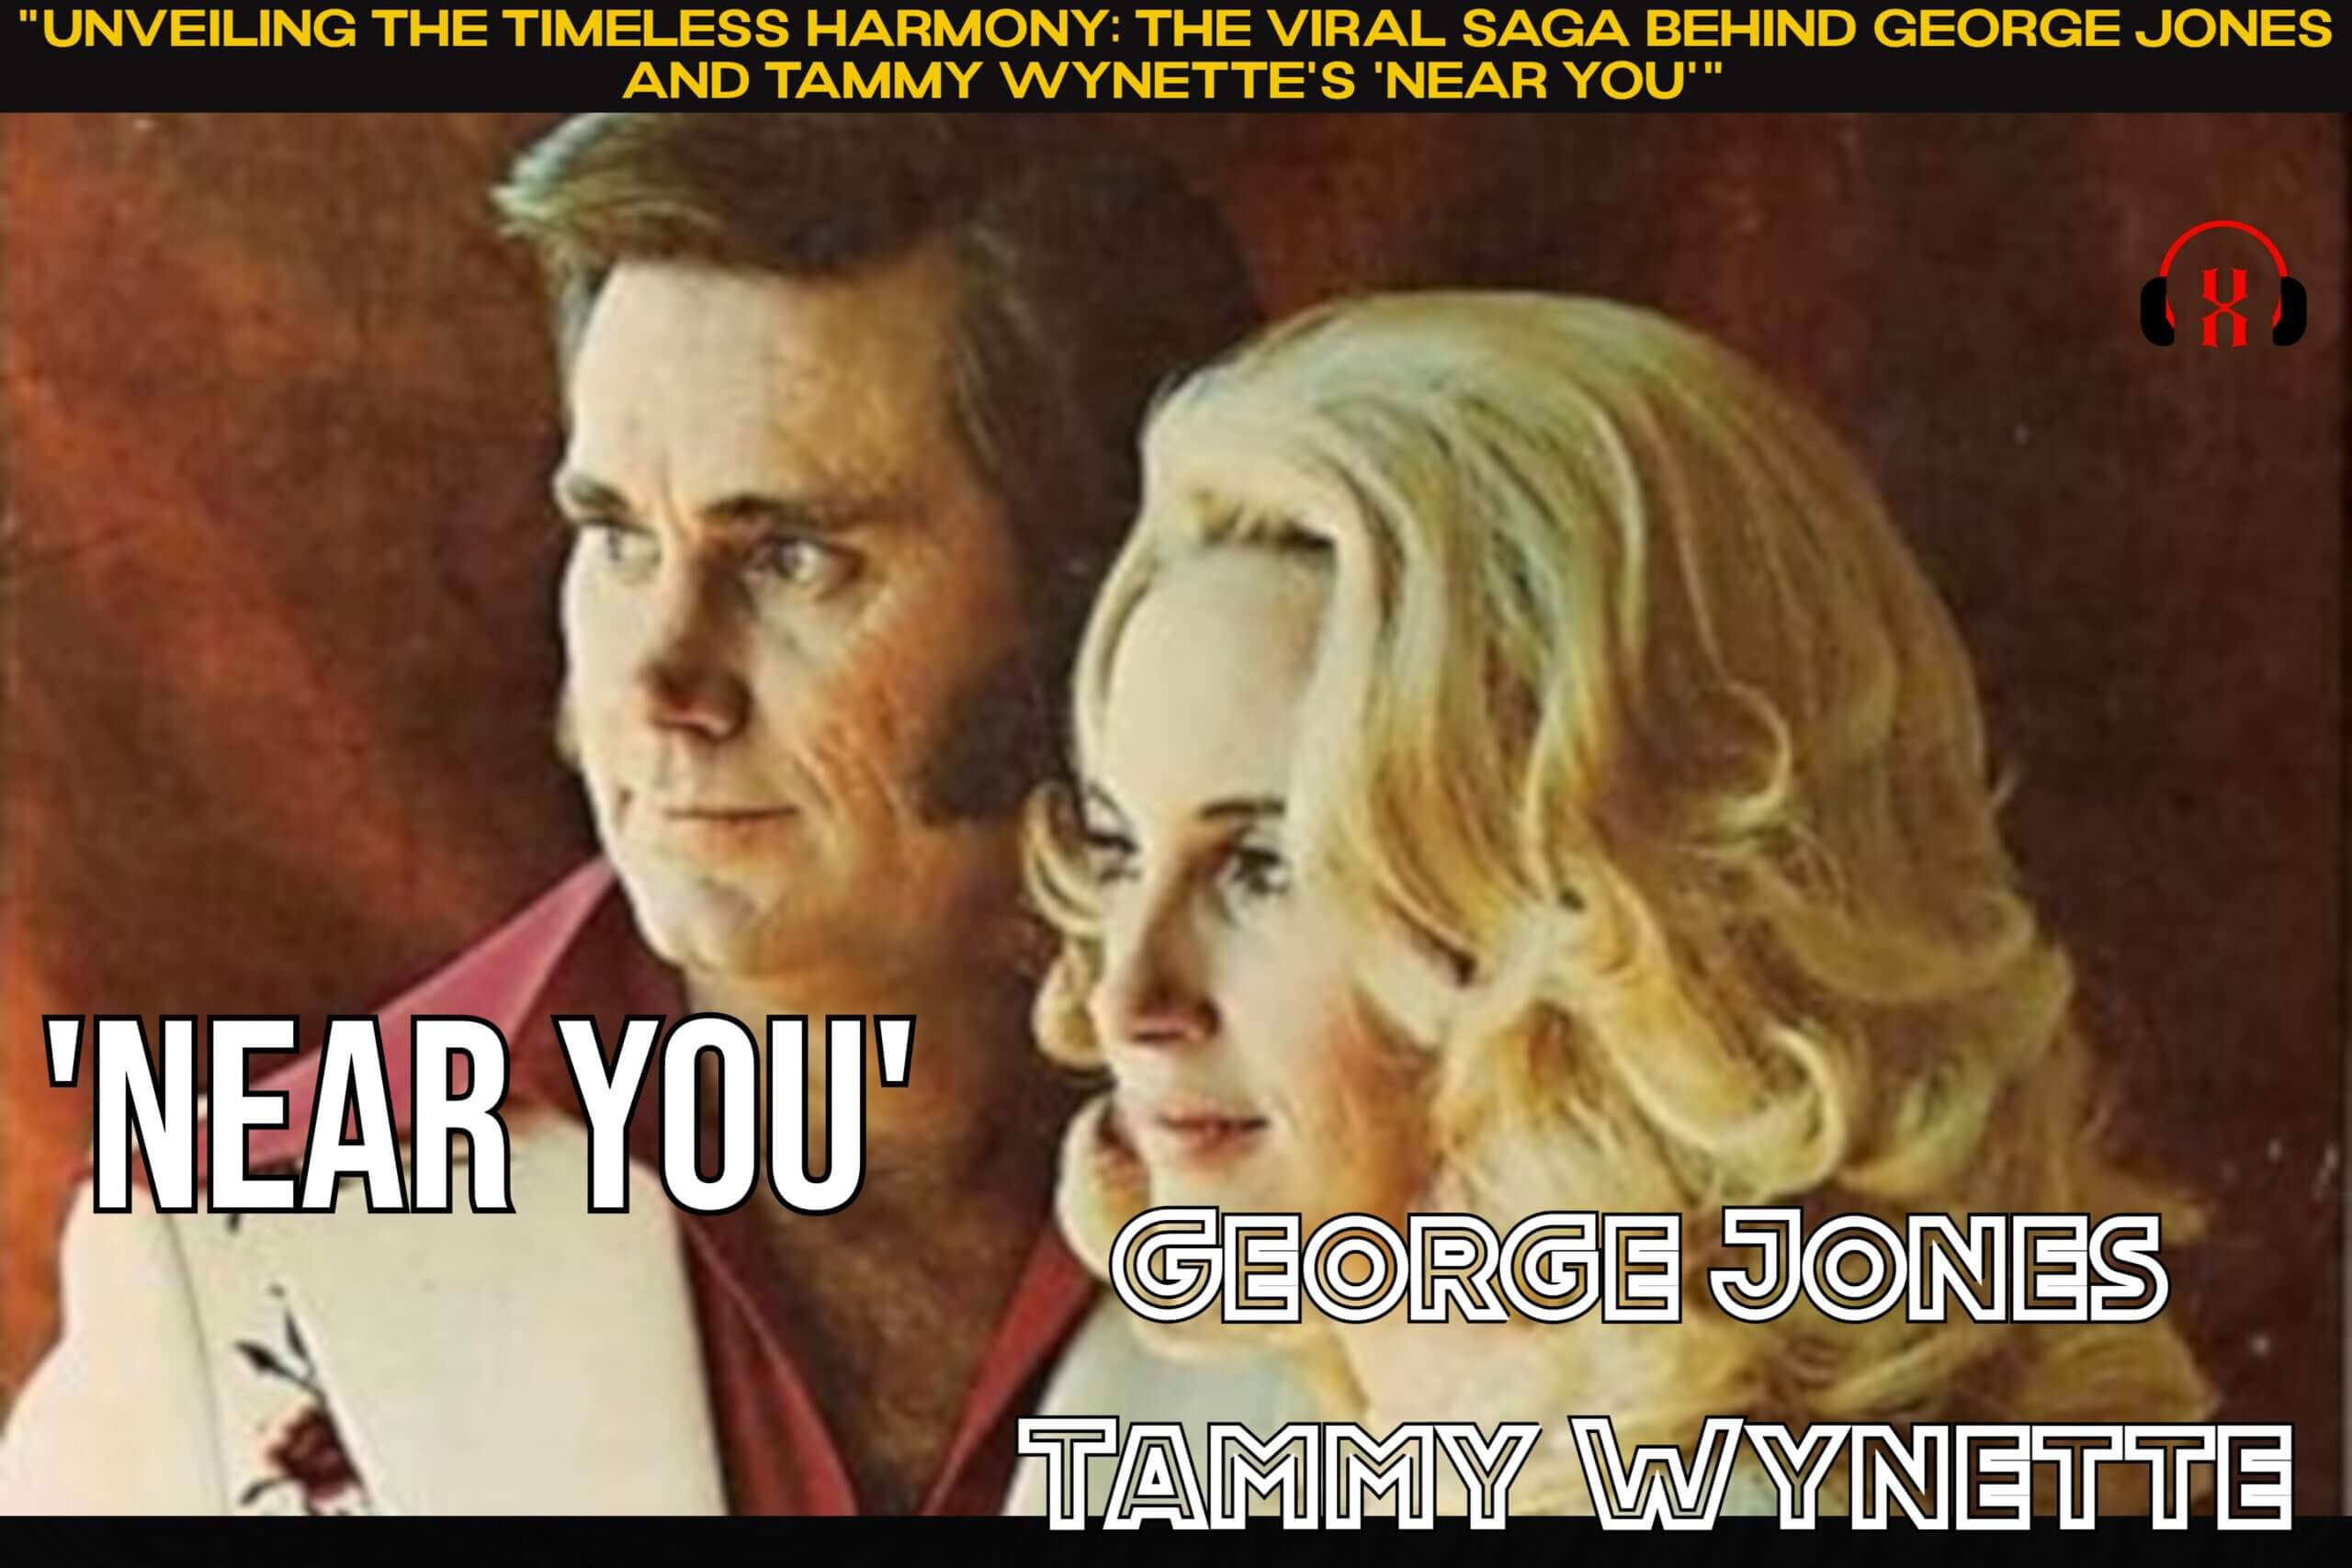 “Unveiling the Timeless Harmony: The Viral Saga Behind George Jones and Tammy Wynette’s ‘Near You'”